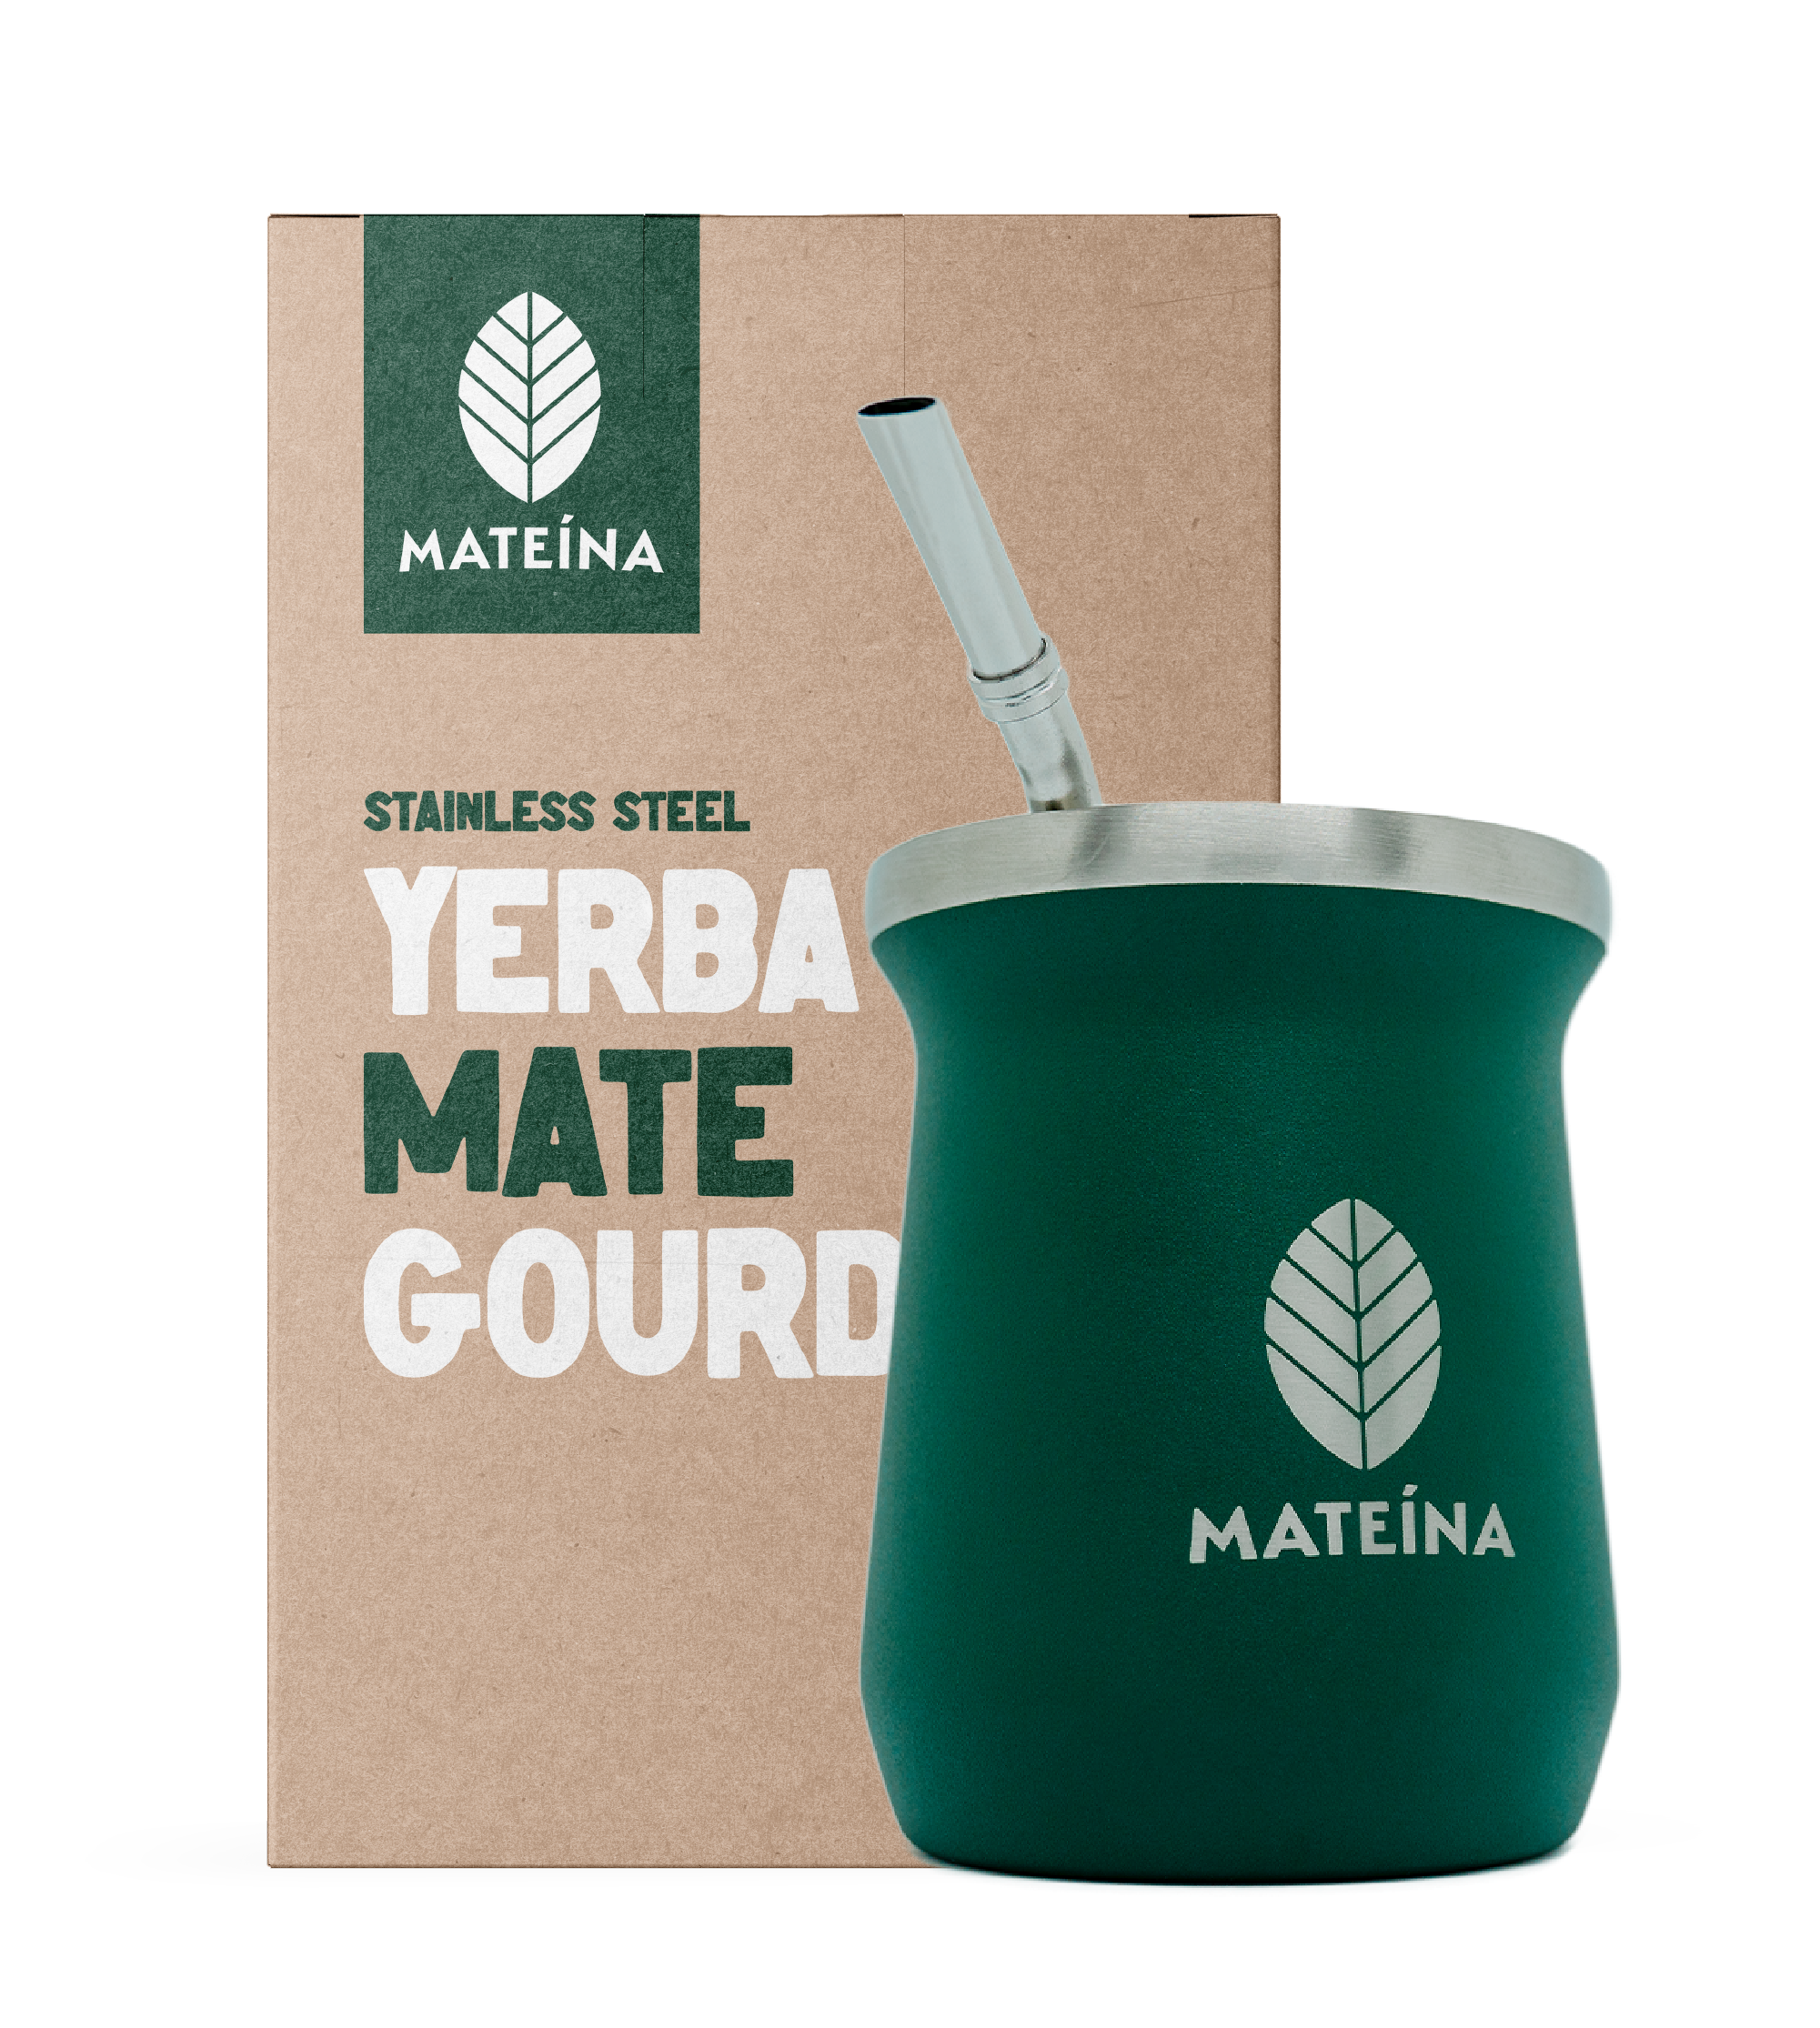 Mateina | Stainless steel gourd and bombilla for yerba mate